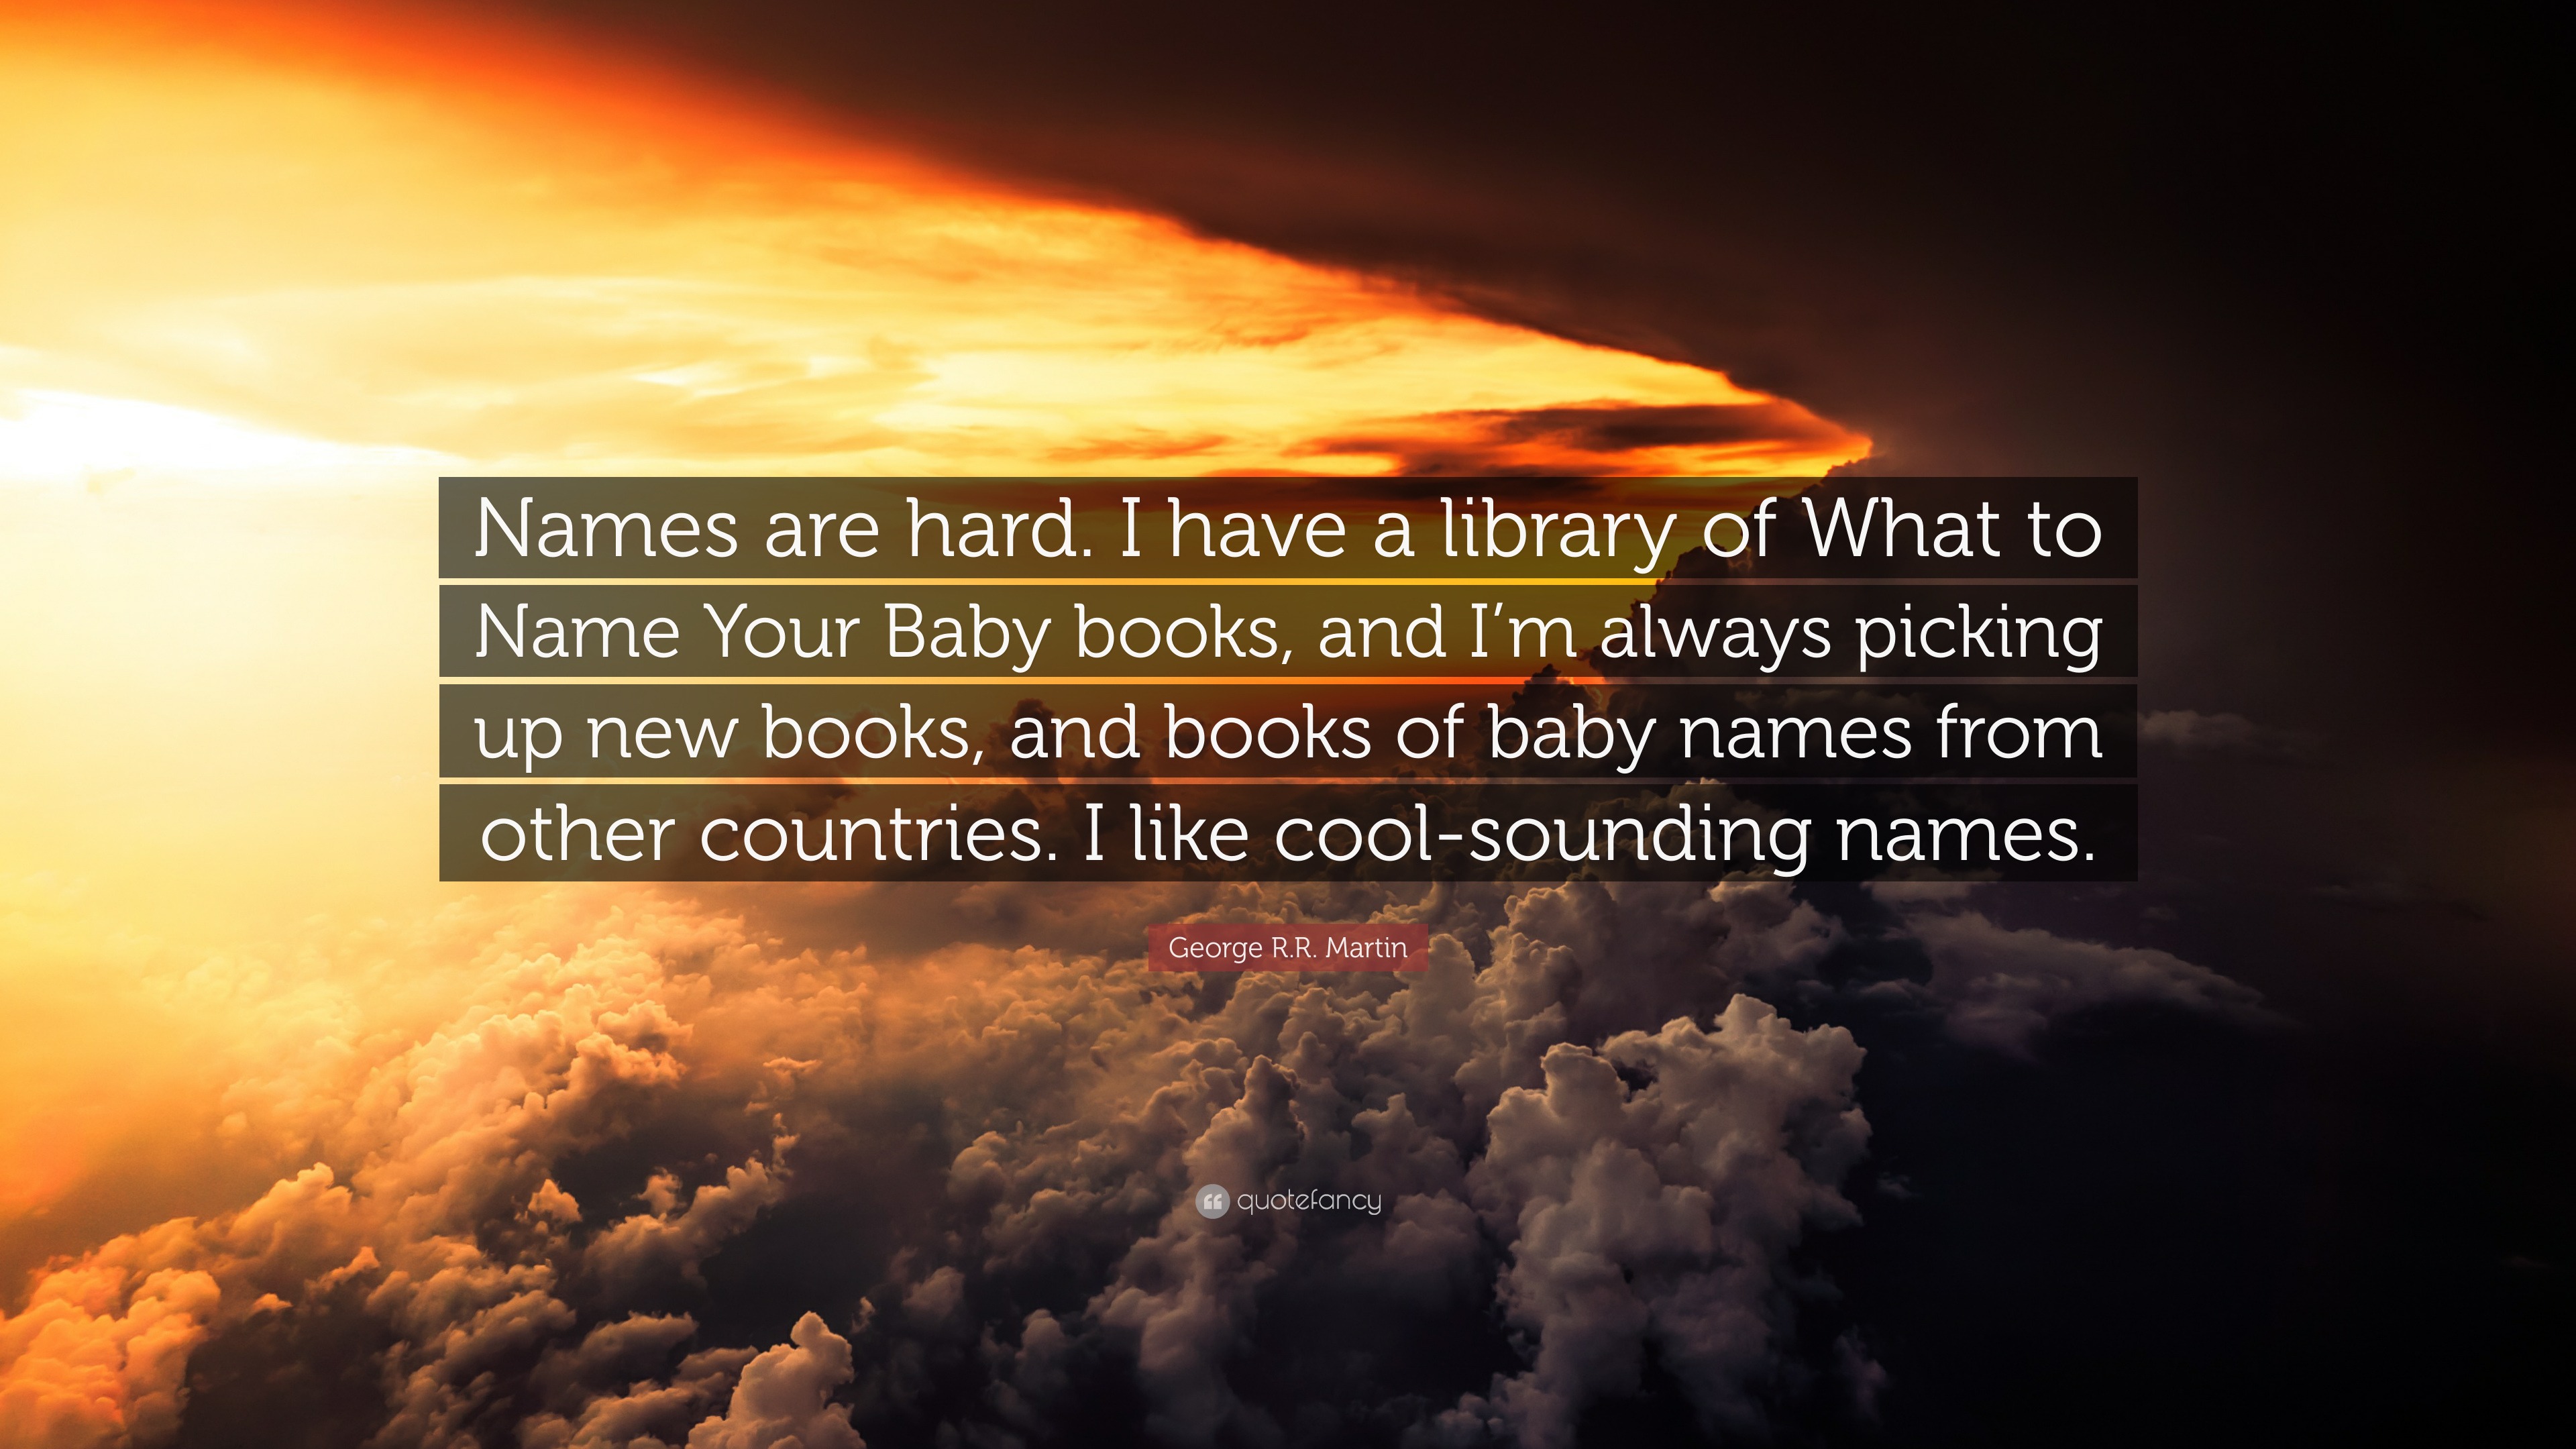 George R.R. Martin Quote: “Names are hard. I have a library of What to